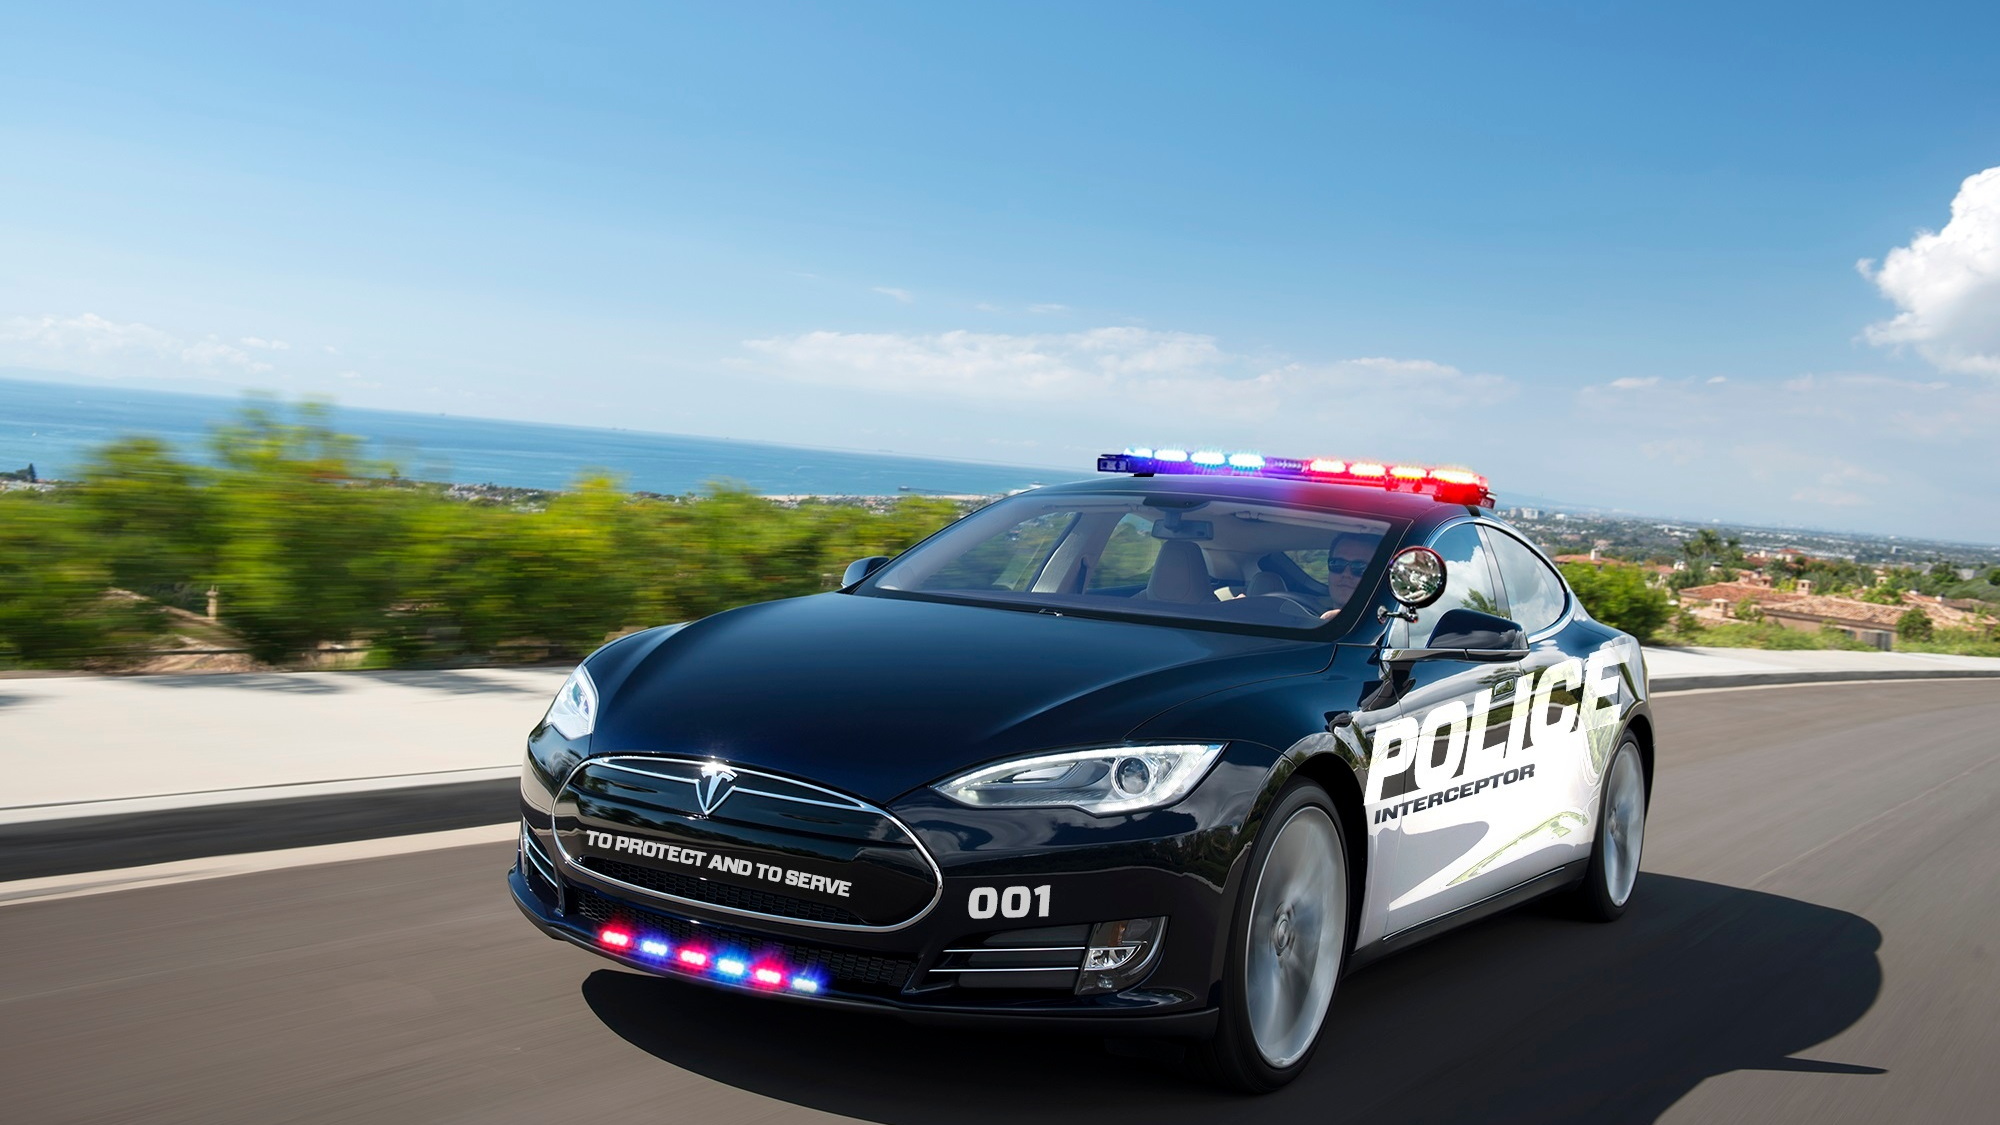 Simulation of Tesla Model S as a police cruiser